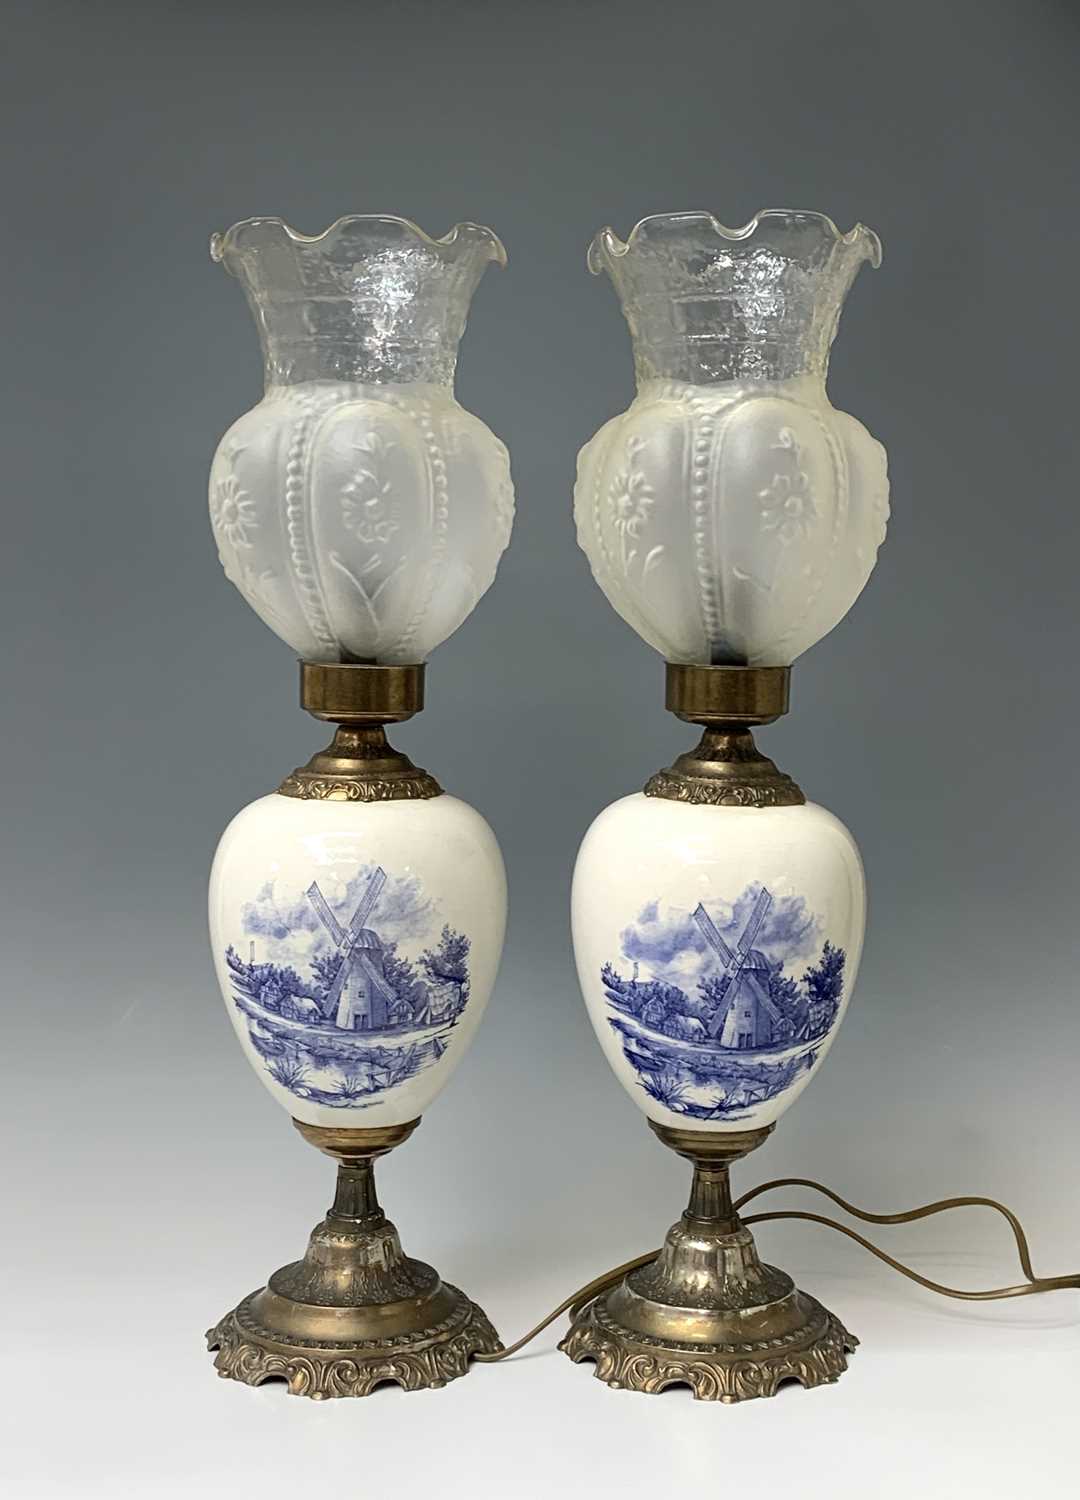 A pair of 20th century gilt metal mounted Delft table lamps with glass shades. Height 60.5cm. - Image 10 of 11